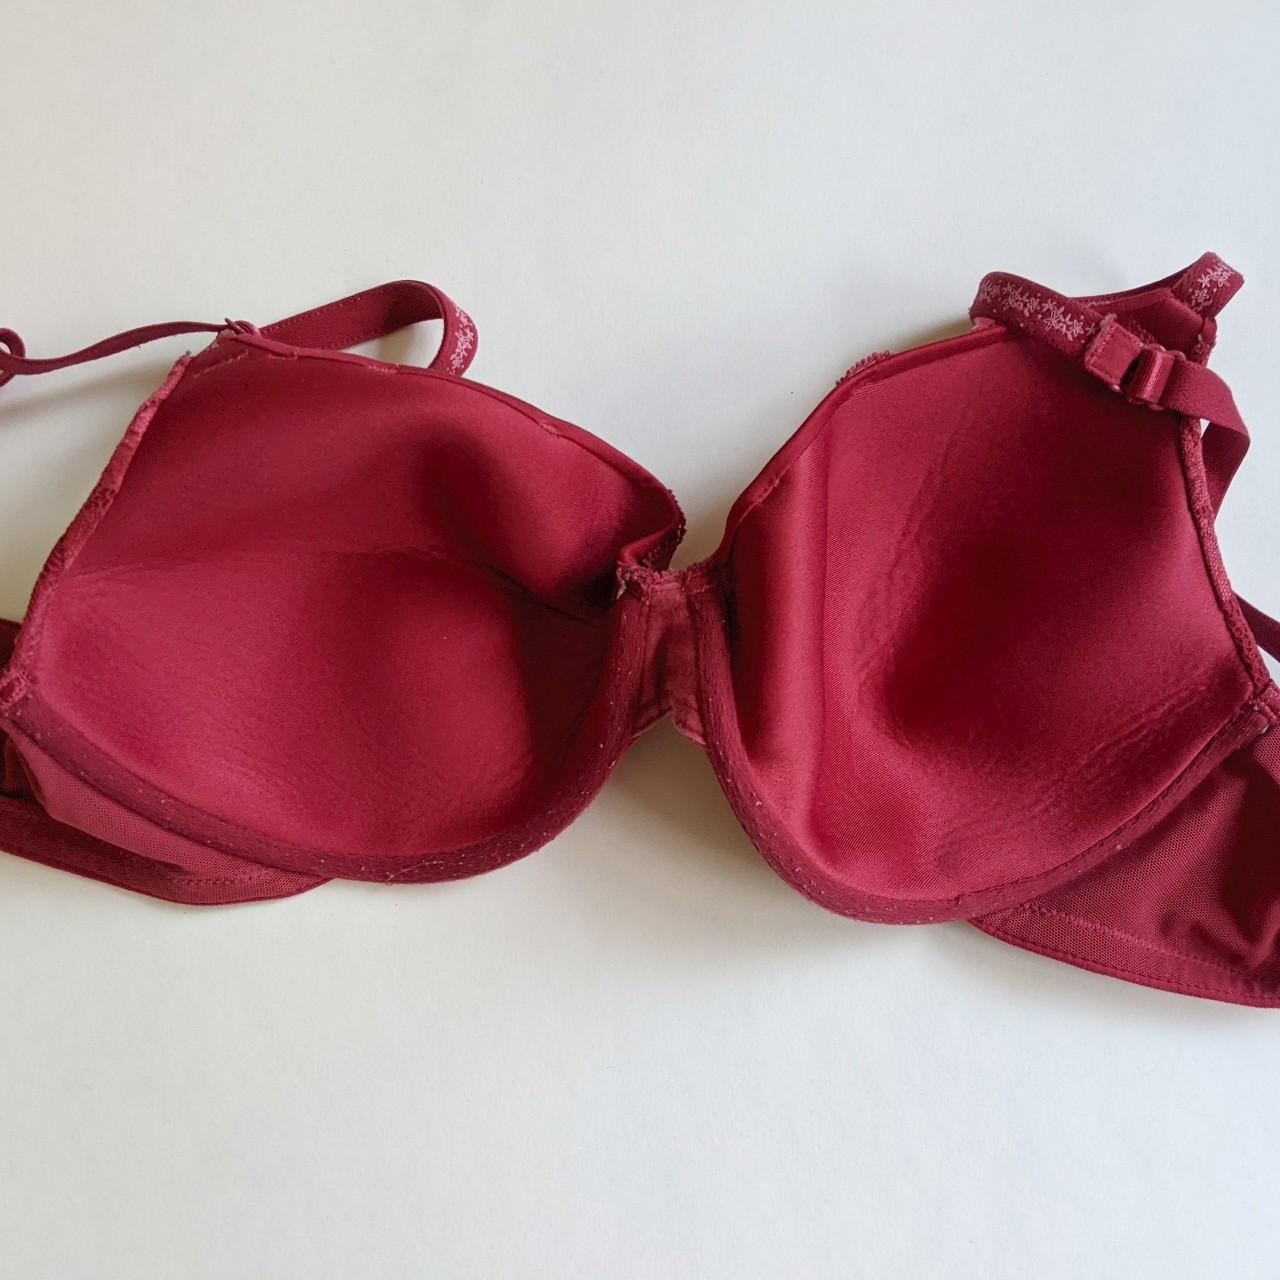 Product Image 3 - Red lace underwire bra 36C

Warner's